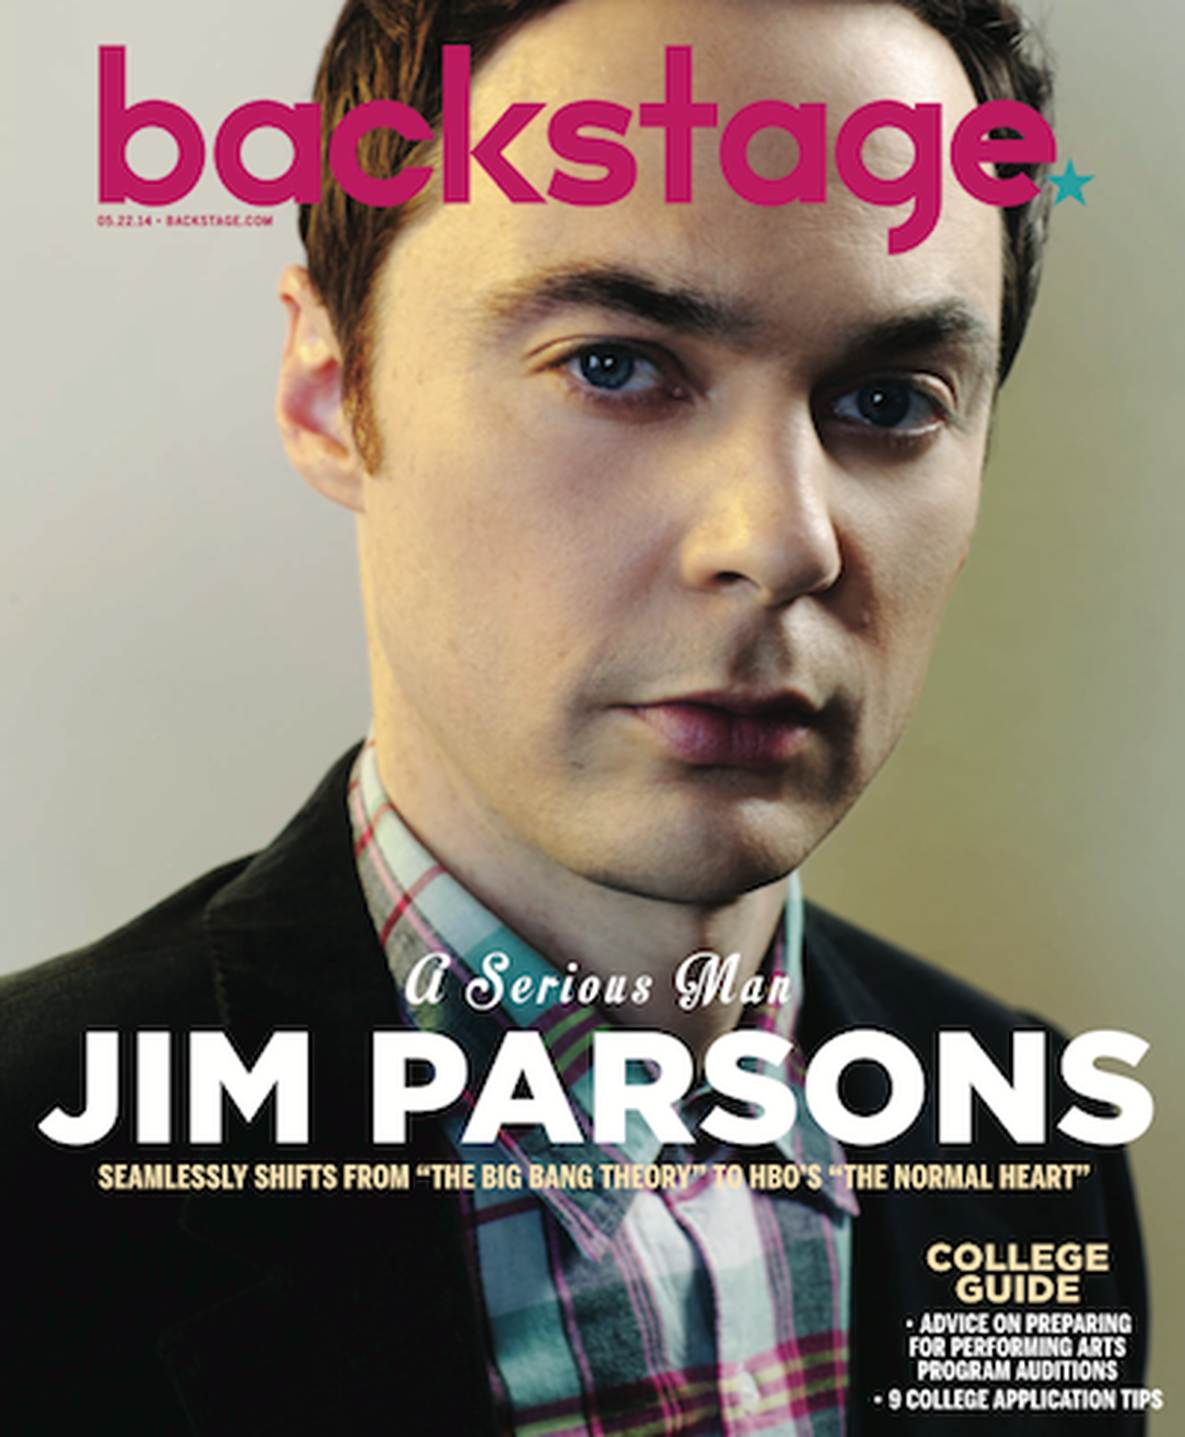 Jim Parsons On The Cover Of Backstage This Week